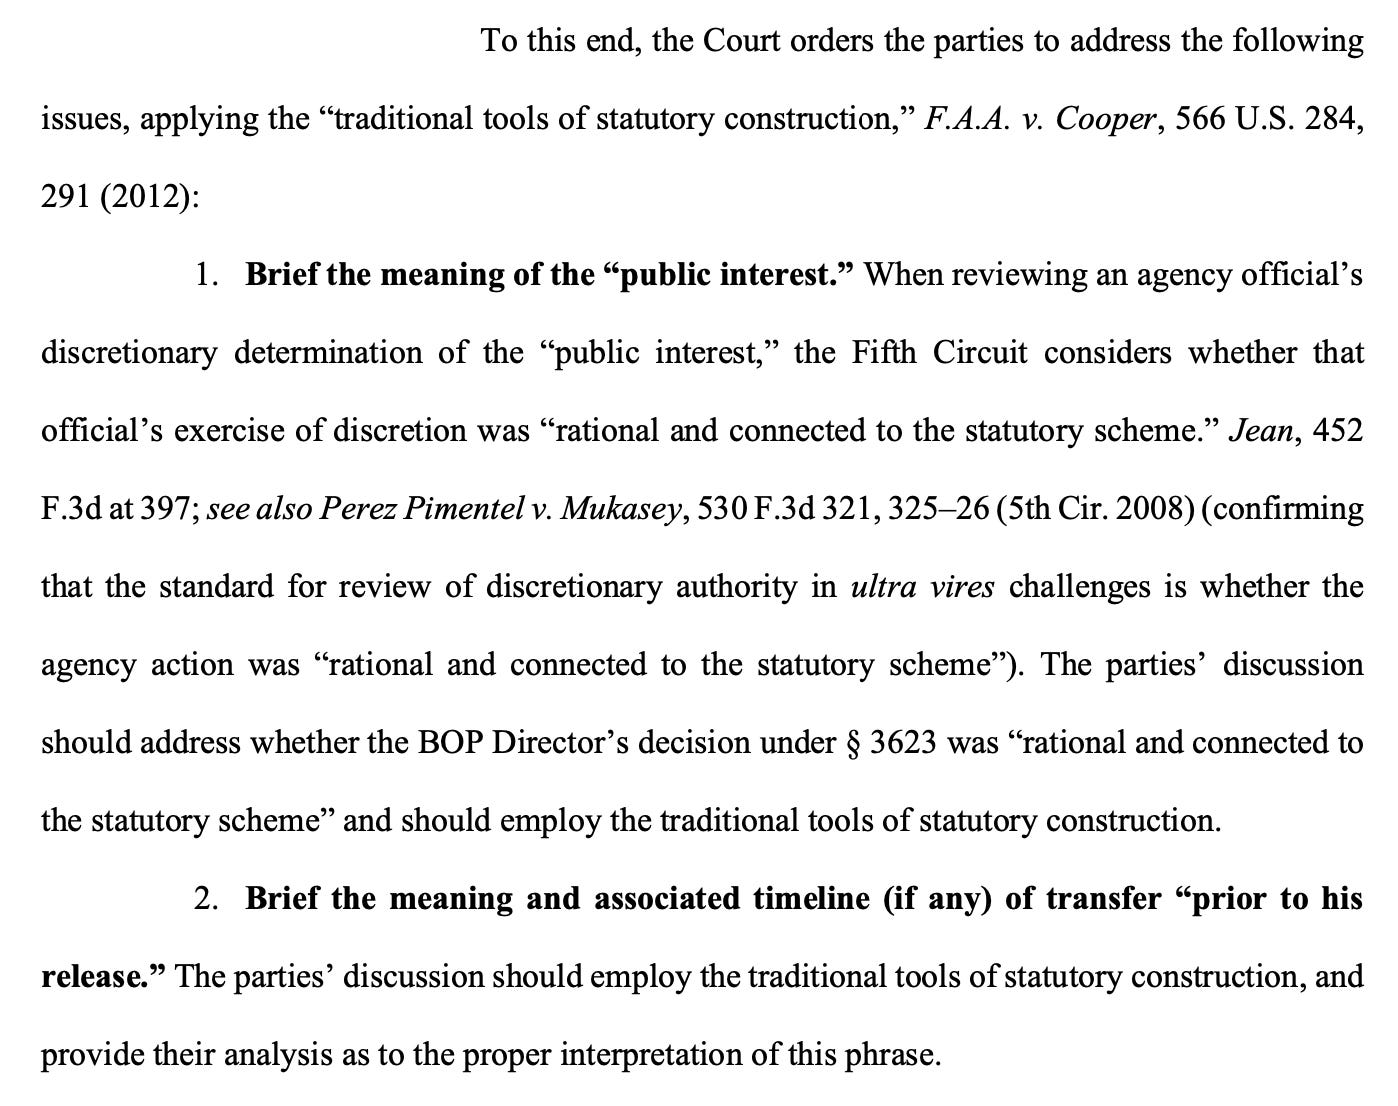 To this end, the Court orders the parties to address the following issues, applying the “traditional tools of statutory construction": 1. Brief the meaning of the “public interest.” When reviewing an agency official’s discretionary determination of the “public interest,” the Fifth Circuit considers whether that official’s exercise of discretion was “rational and connected to the statutory scheme.” The parties’ discussion should address whether the BOP Director’s decision under § 3623 was “rational and connected to the statutory scheme” and should employ the traditional tools of statutory construction. 2. Brief the meaning and associated timeline (if any) of transfer “prior to his release.” The parties’ discussion should employ the traditional tools of statutory construction, and provide their analysis as to the proper interpretation of this phrase.